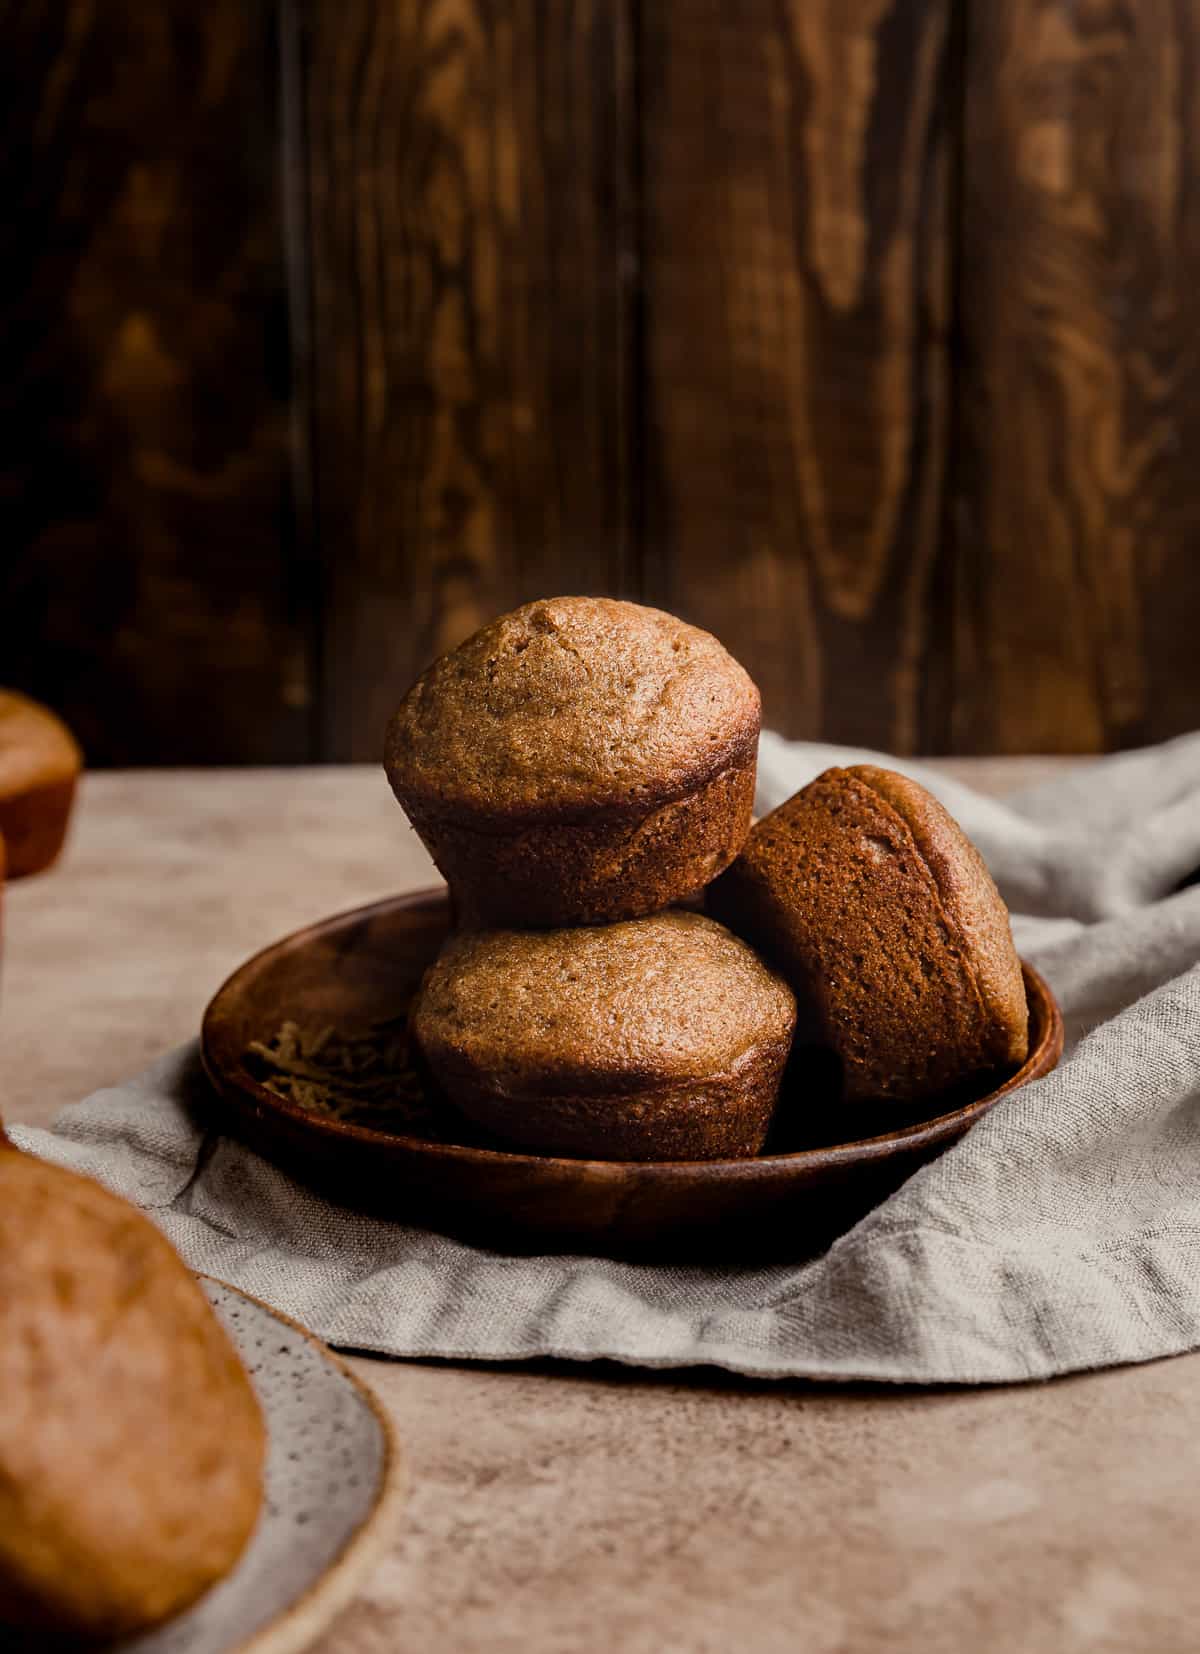 All Bran Muffins with buttermilk stacked on a small wooden plate against a wooden background.